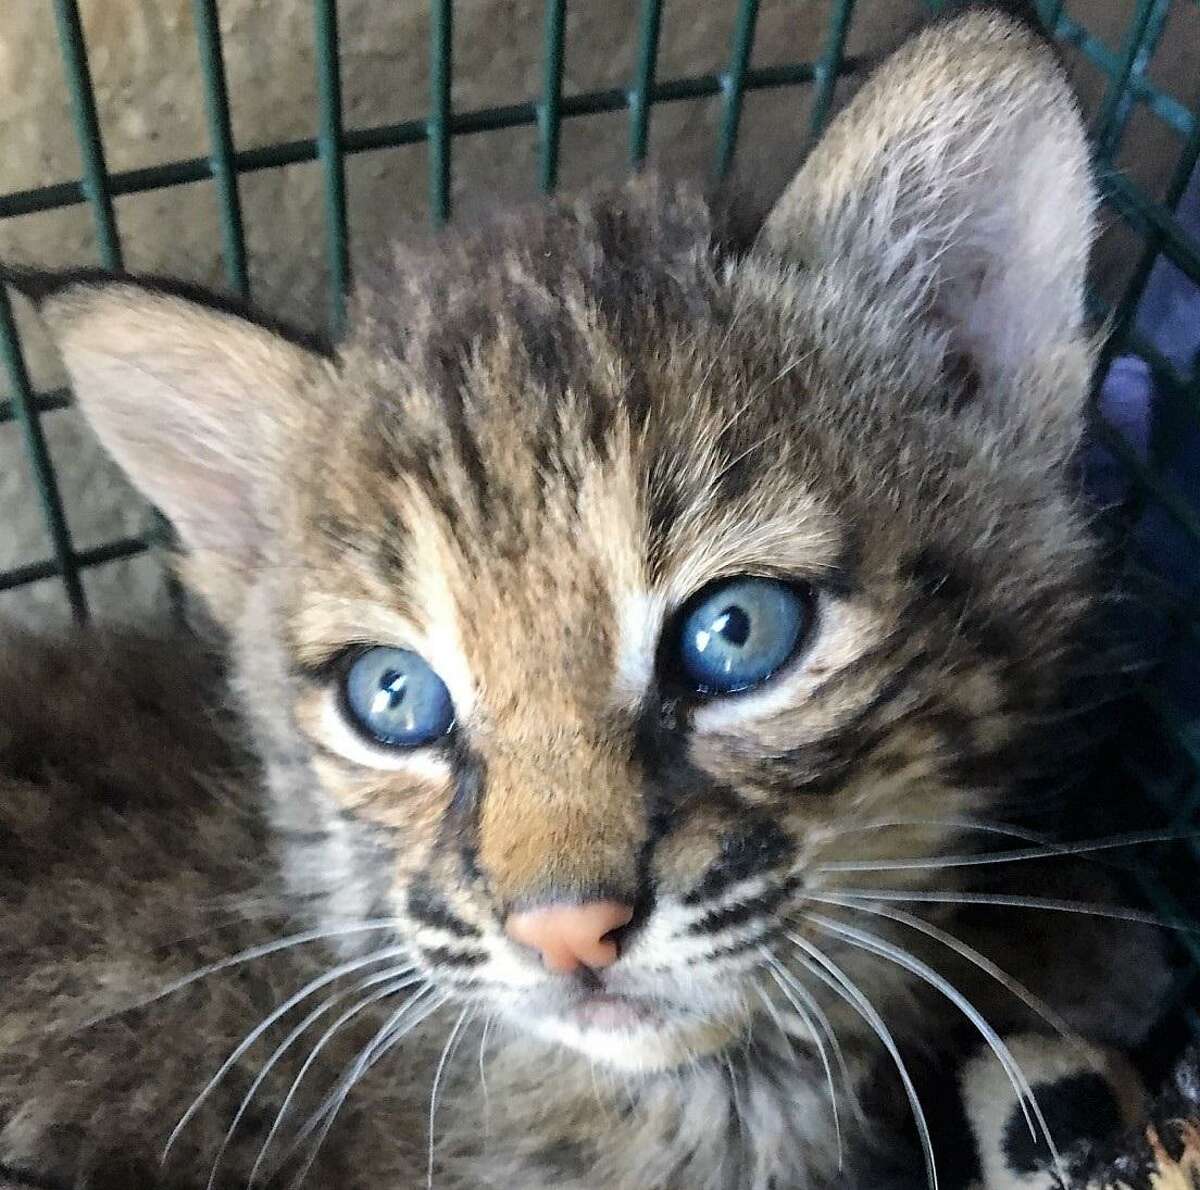 One of two bobcat kittens found by a Northeast Side resident in early May, in an alley near her home, not far from Salado Creek.